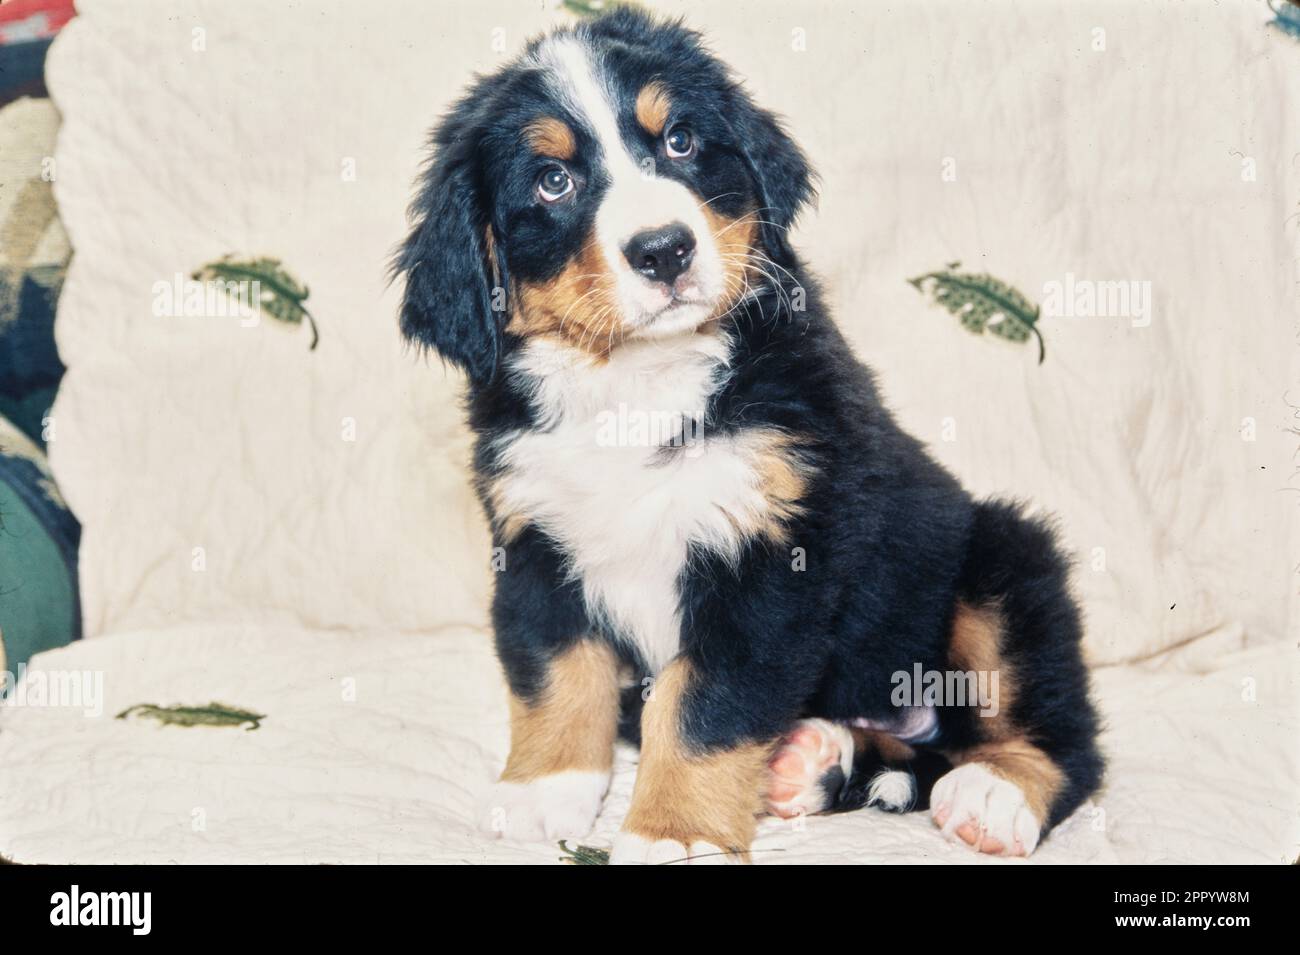 Bernese Mountain Dog puppy on blanket with leaves Stock Photo